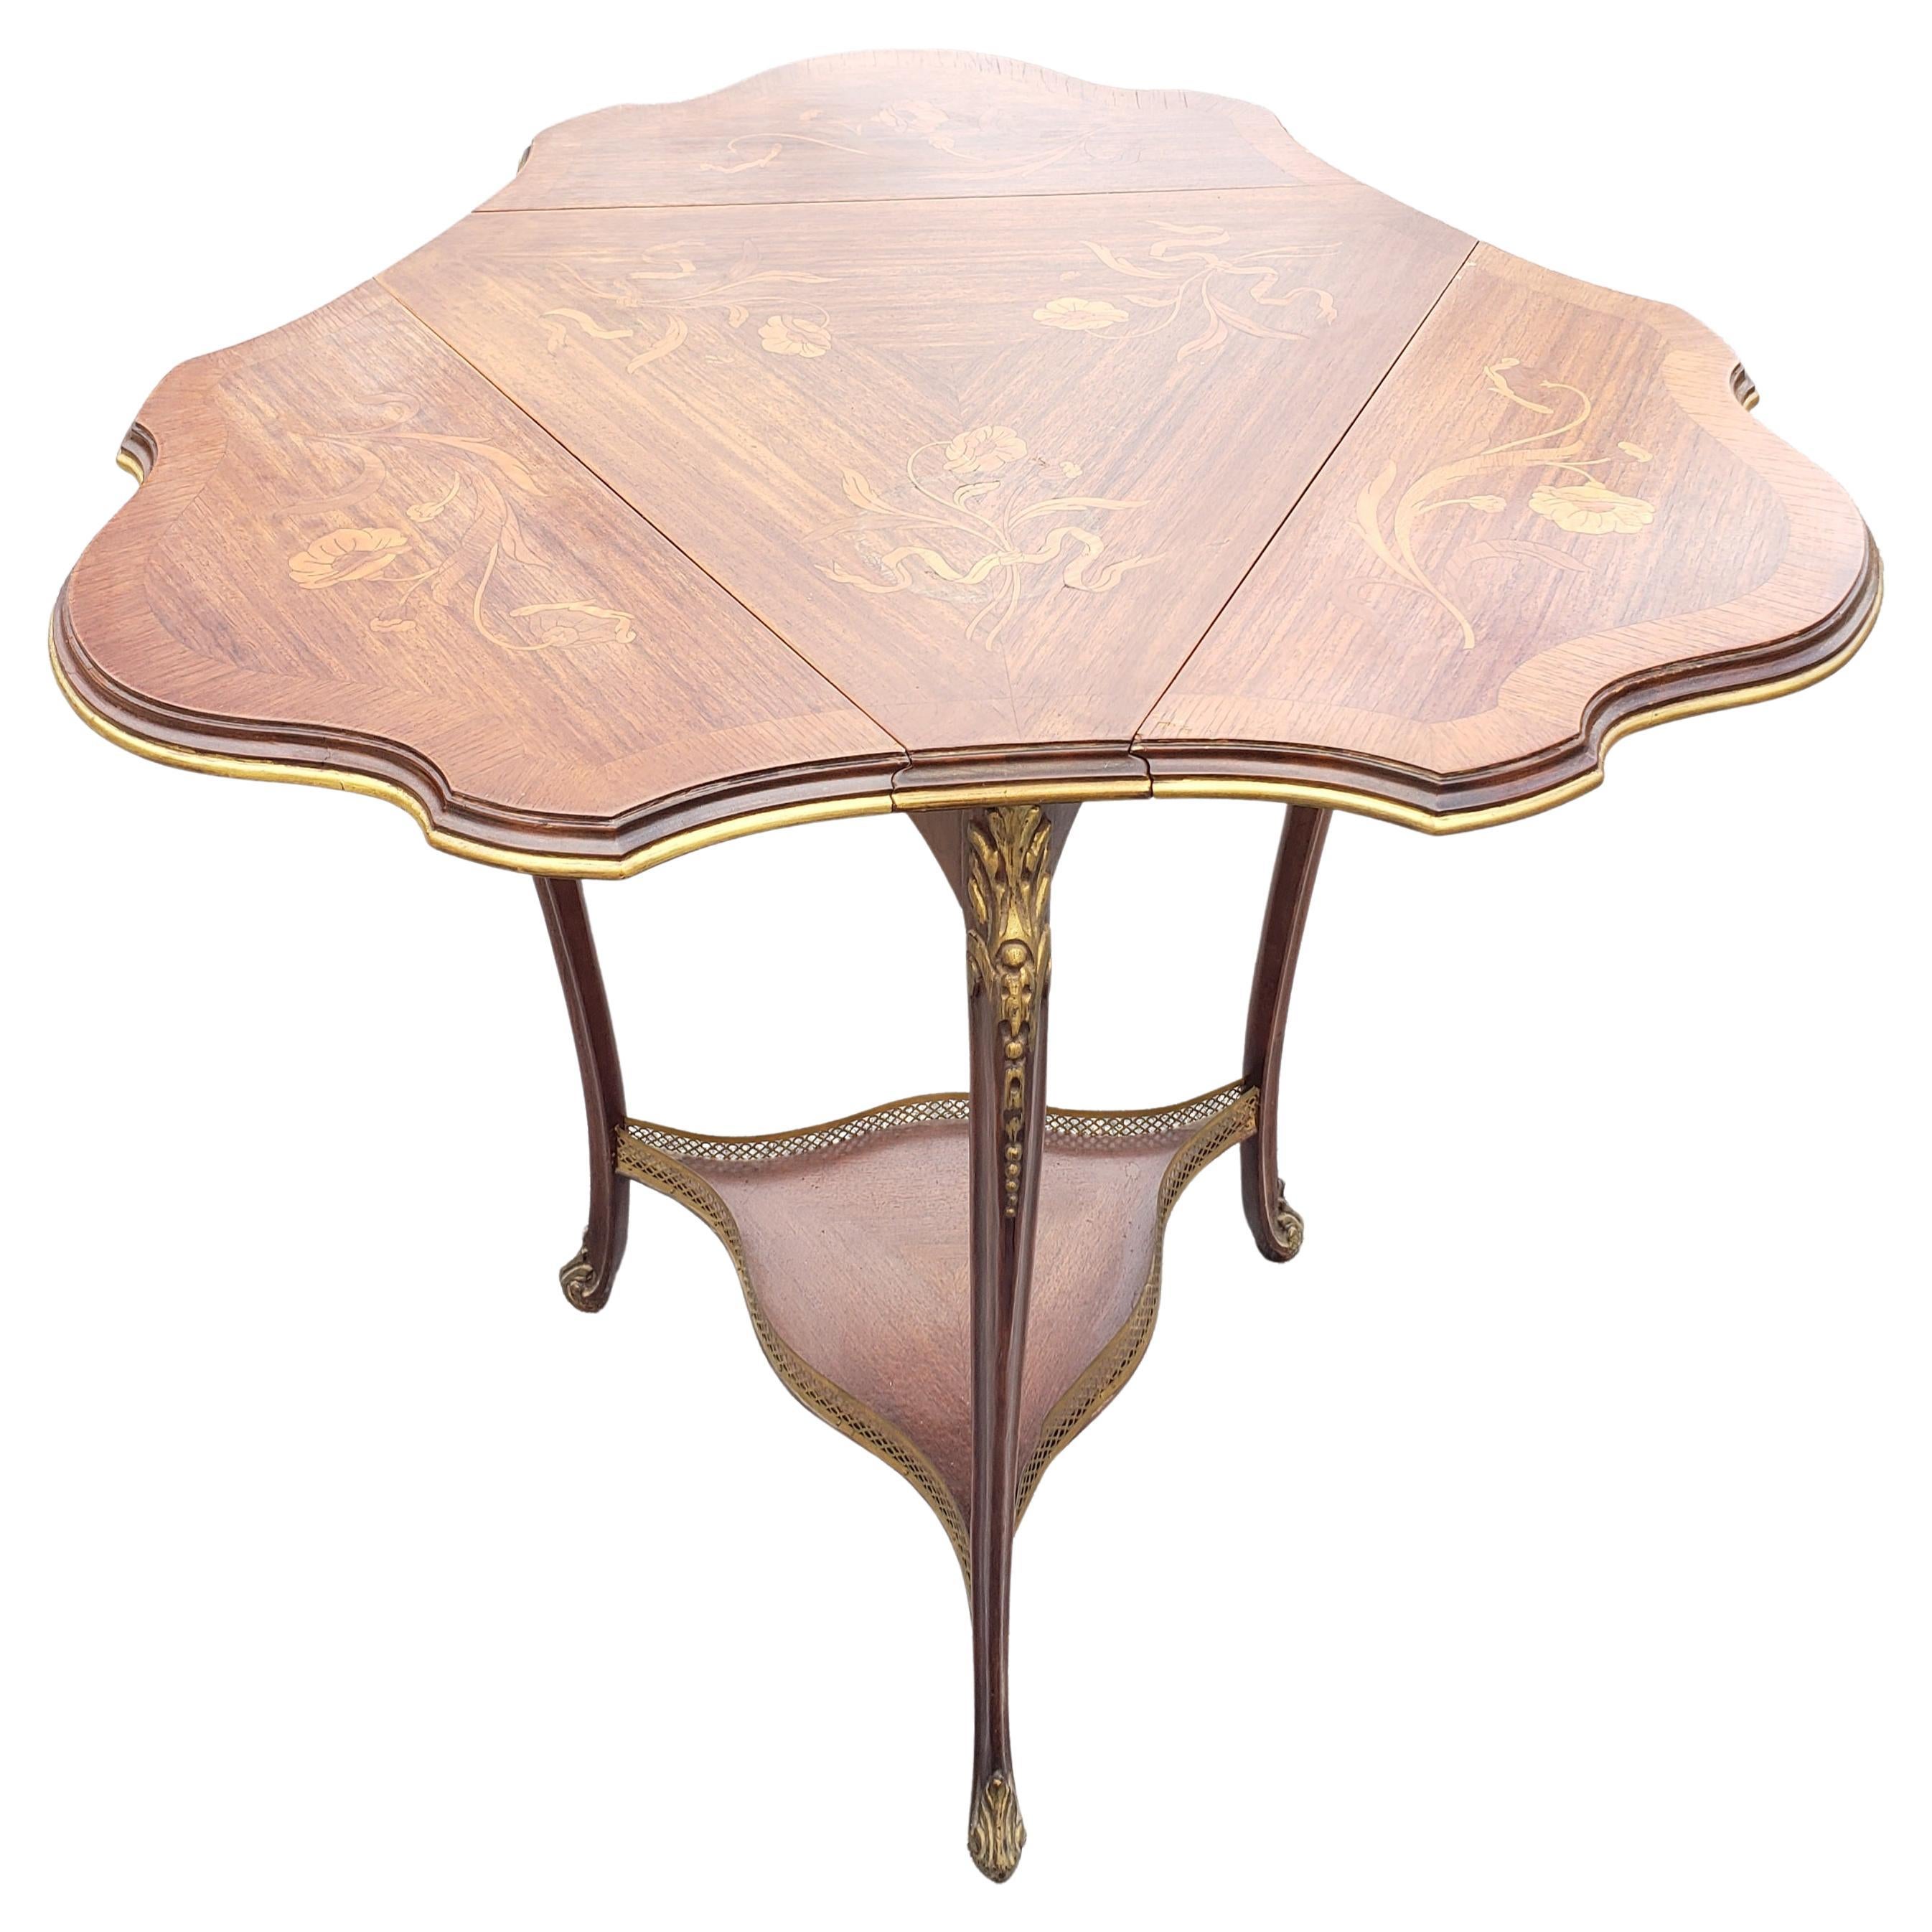 A French Rococo style marquetry fruitwood & gilt metal mounted triangular drop leaf table. 
Measures 21